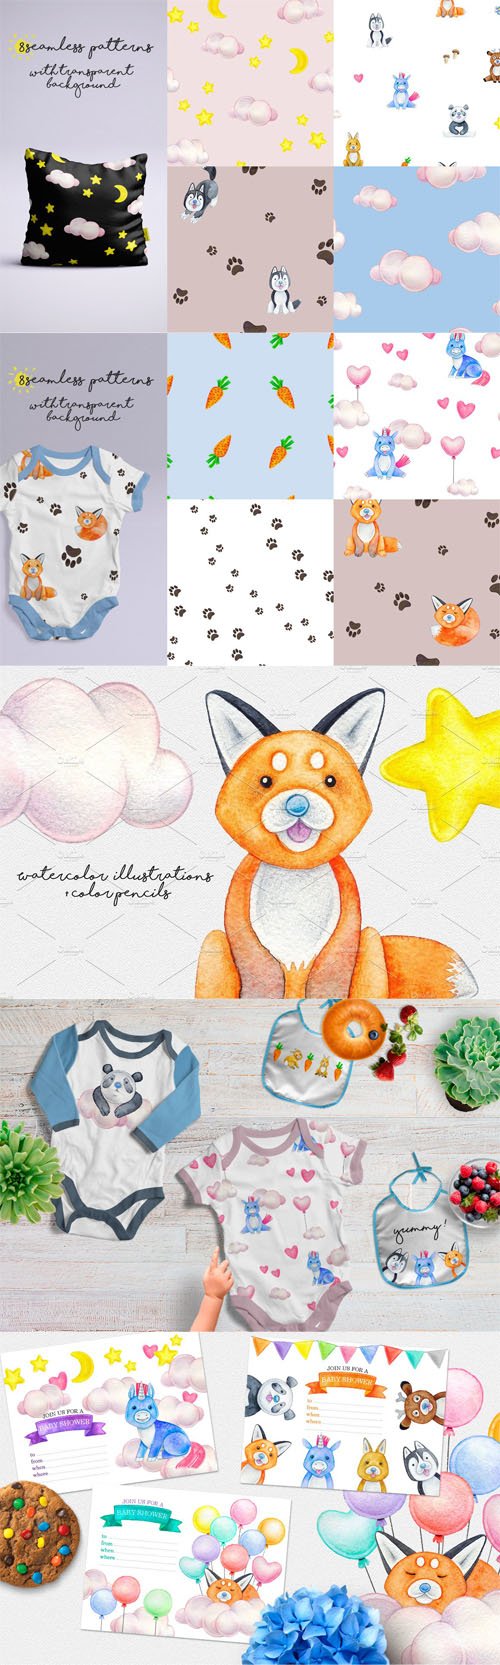 CUTE Animals - Childrens Illustrations + Lovely Patterns